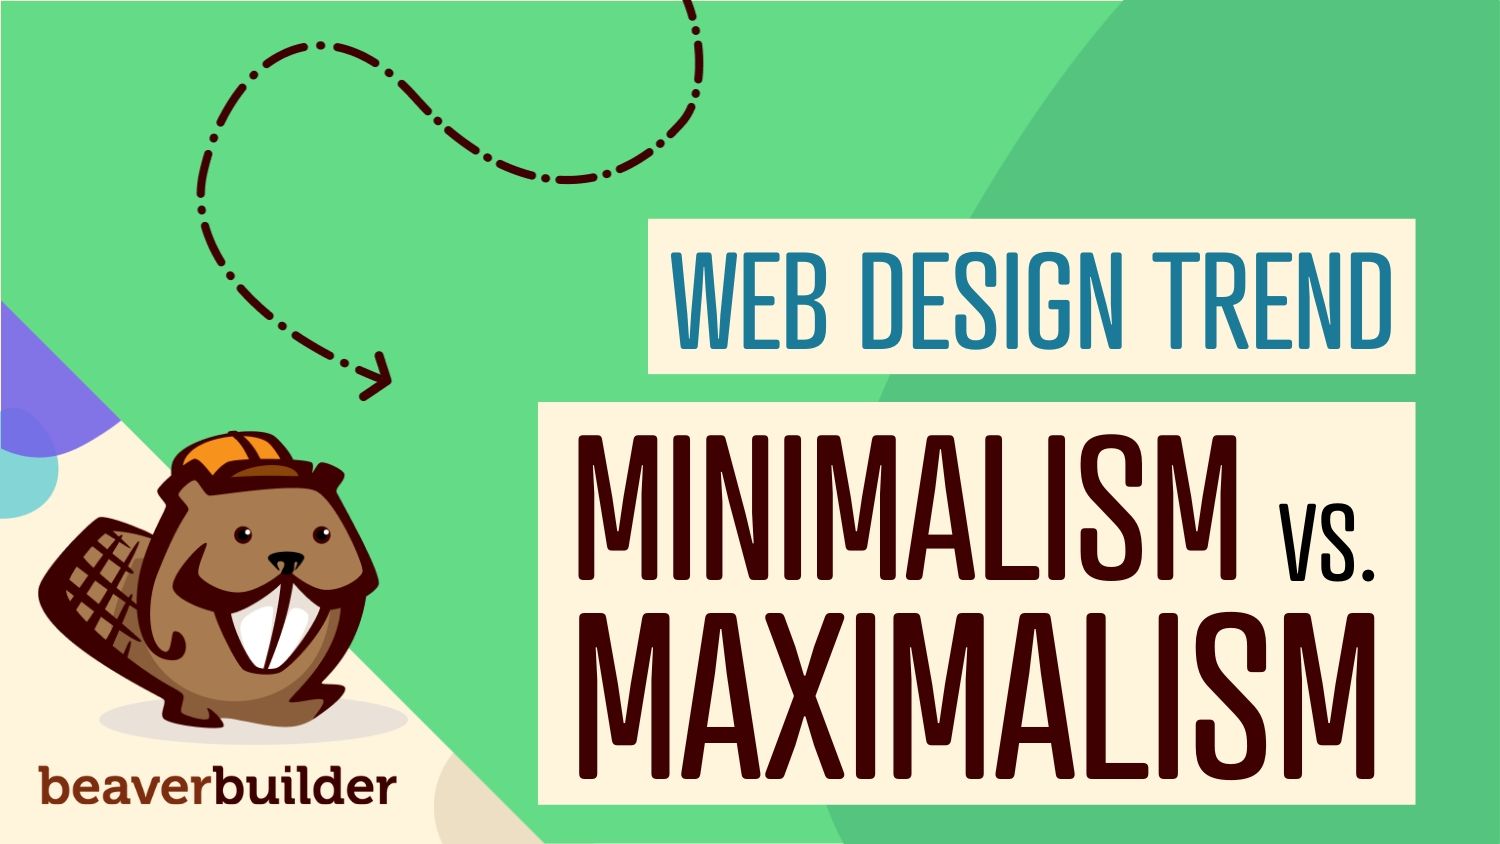 Minimalism vs Maximalism: A Guide for Web Design Trends